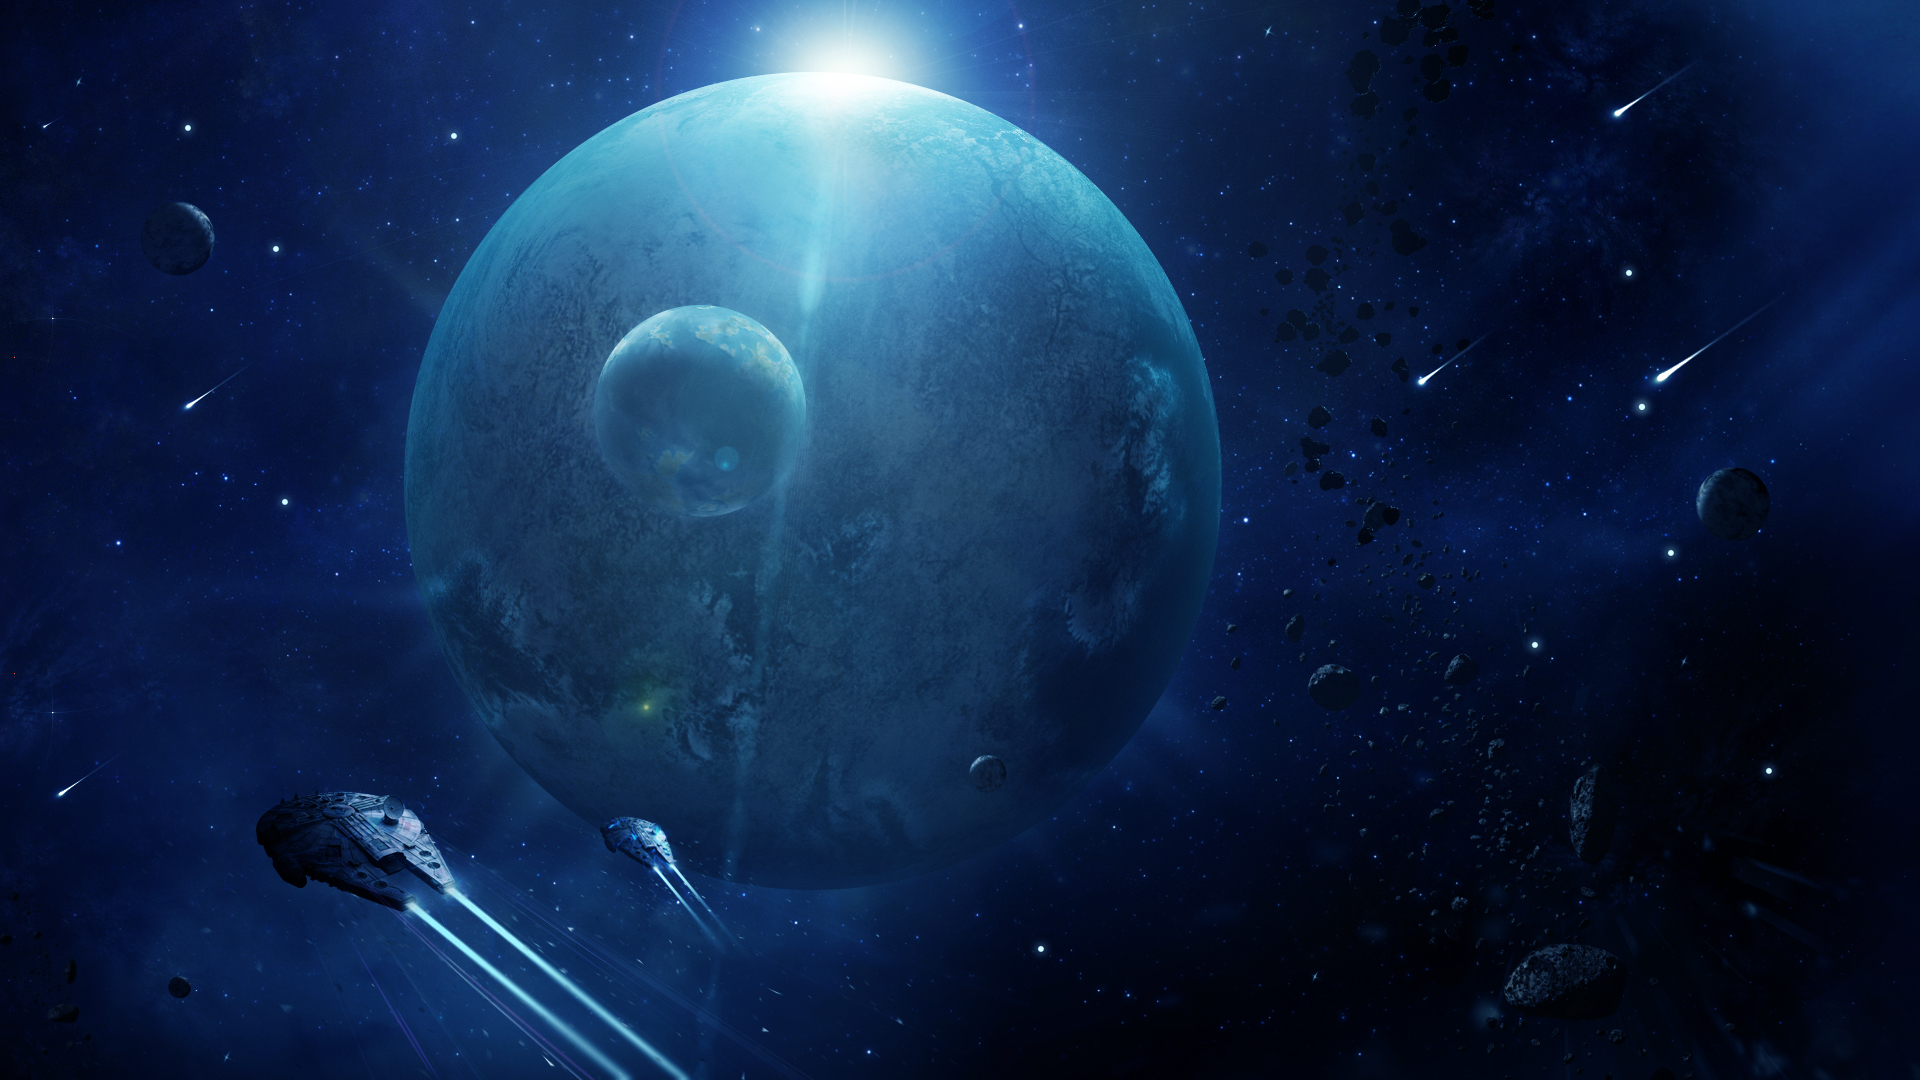 star wars planet wallpaper,outer space,astronomical object,atmosphere,space,planet